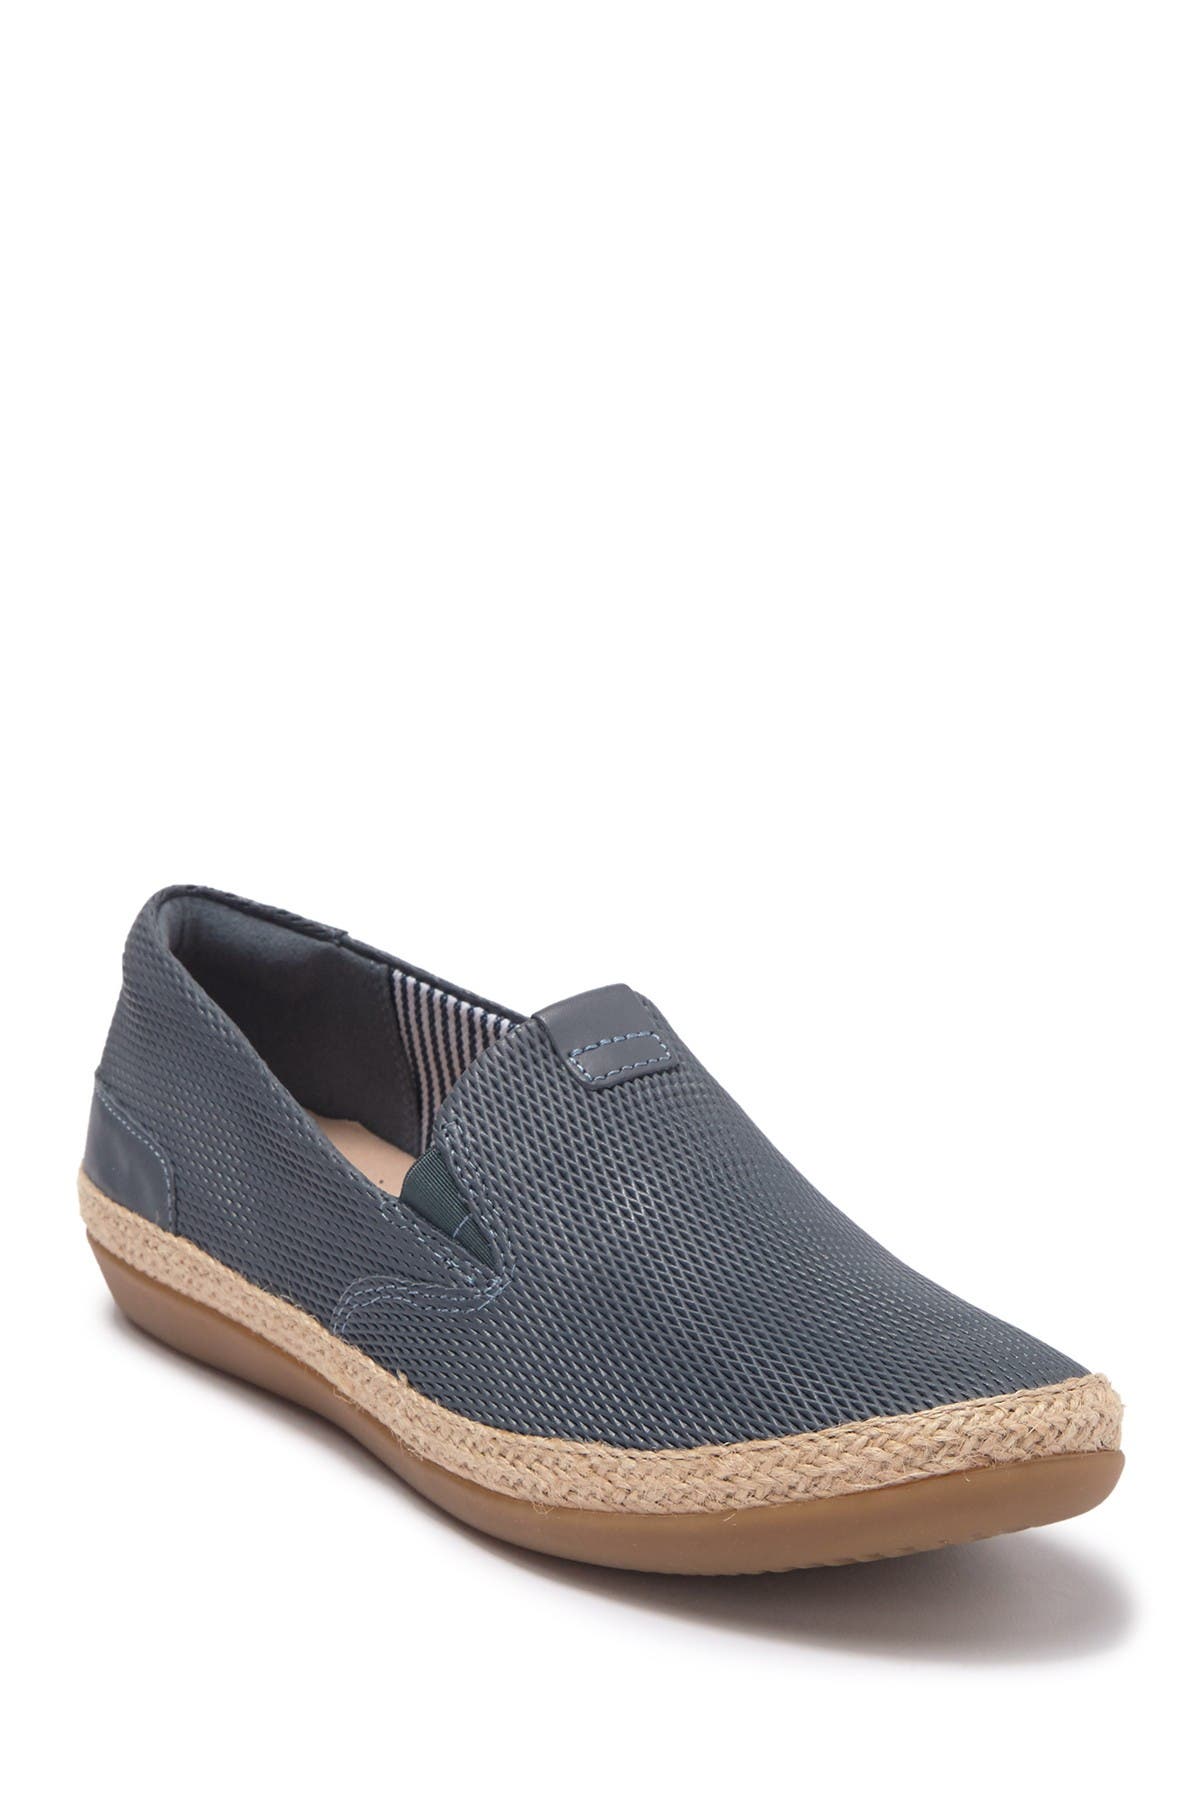 Clarks | Danelly Perforated Suede Slip 